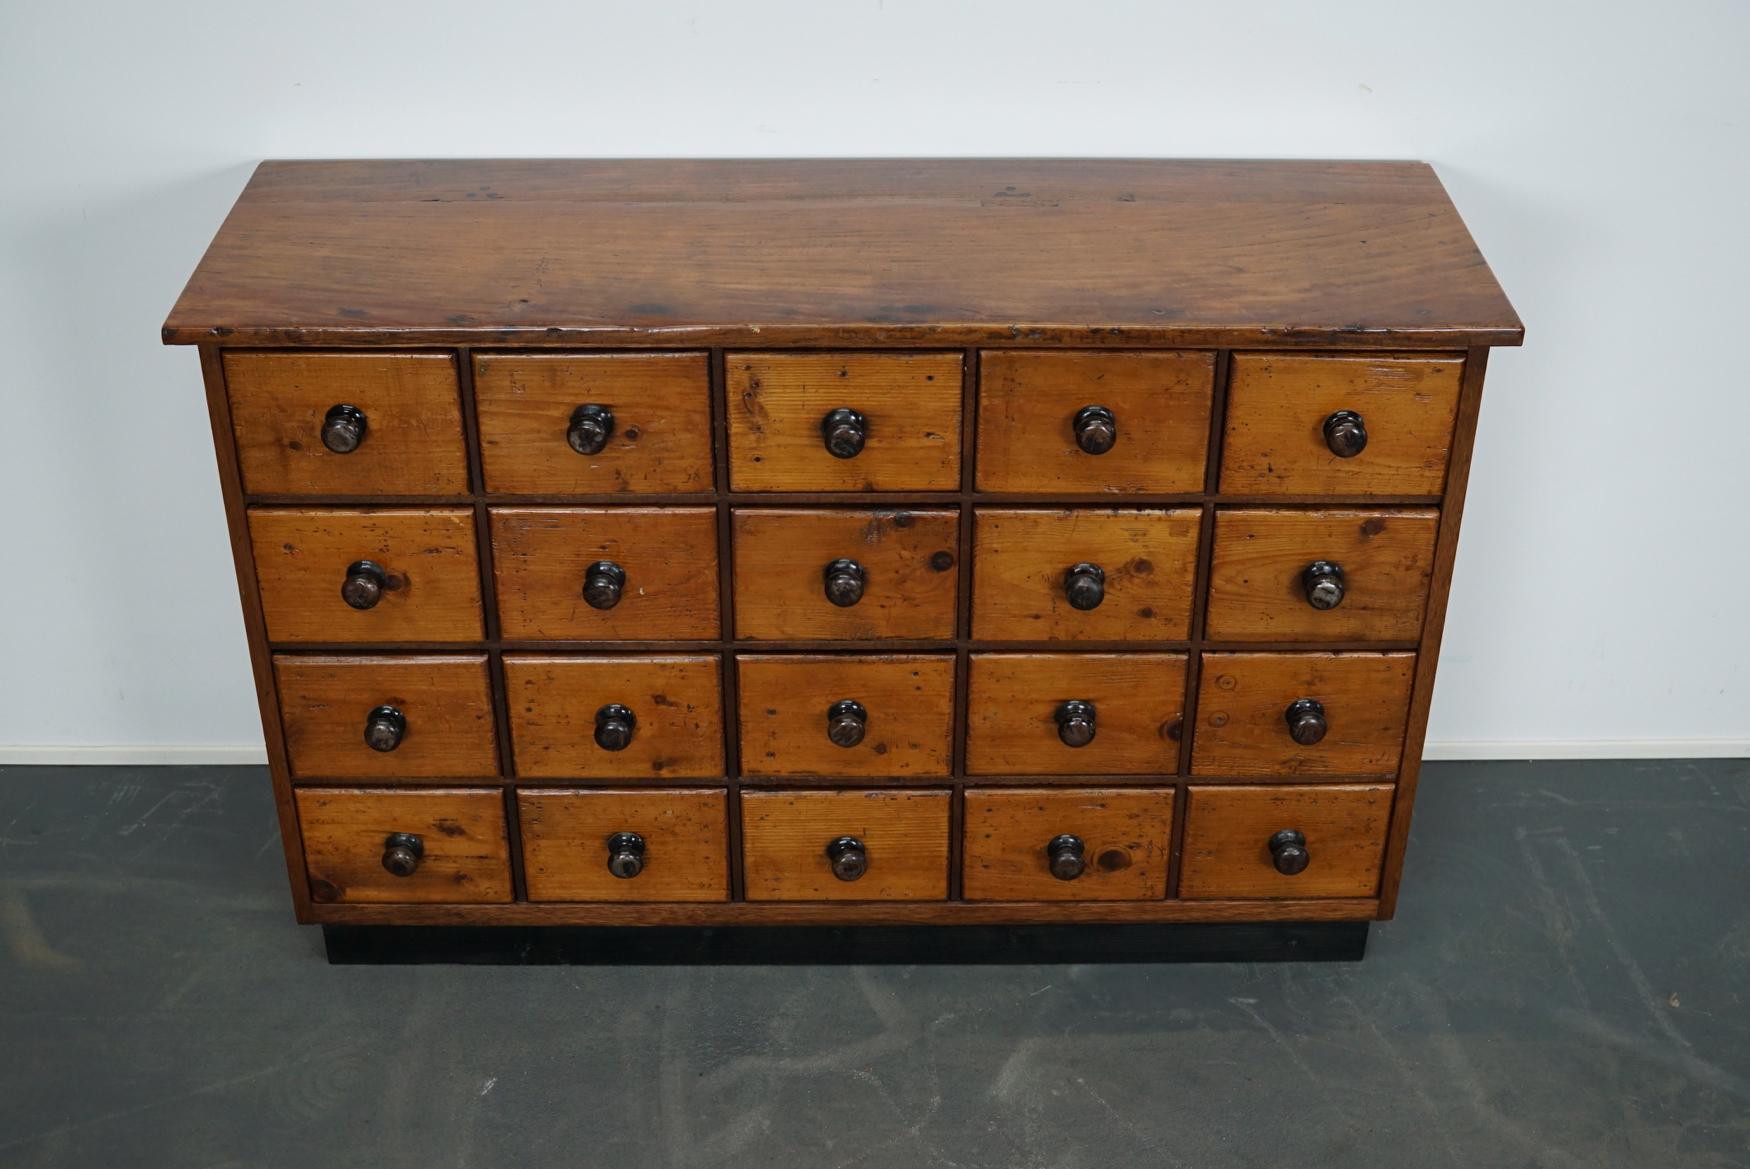 This apothecary cabinet was produced during the 1930s in Germany. This piece features 20 drawers. The interior dimensions of the drawers are: D x W x H 30 x 17.5 x 12 cm.